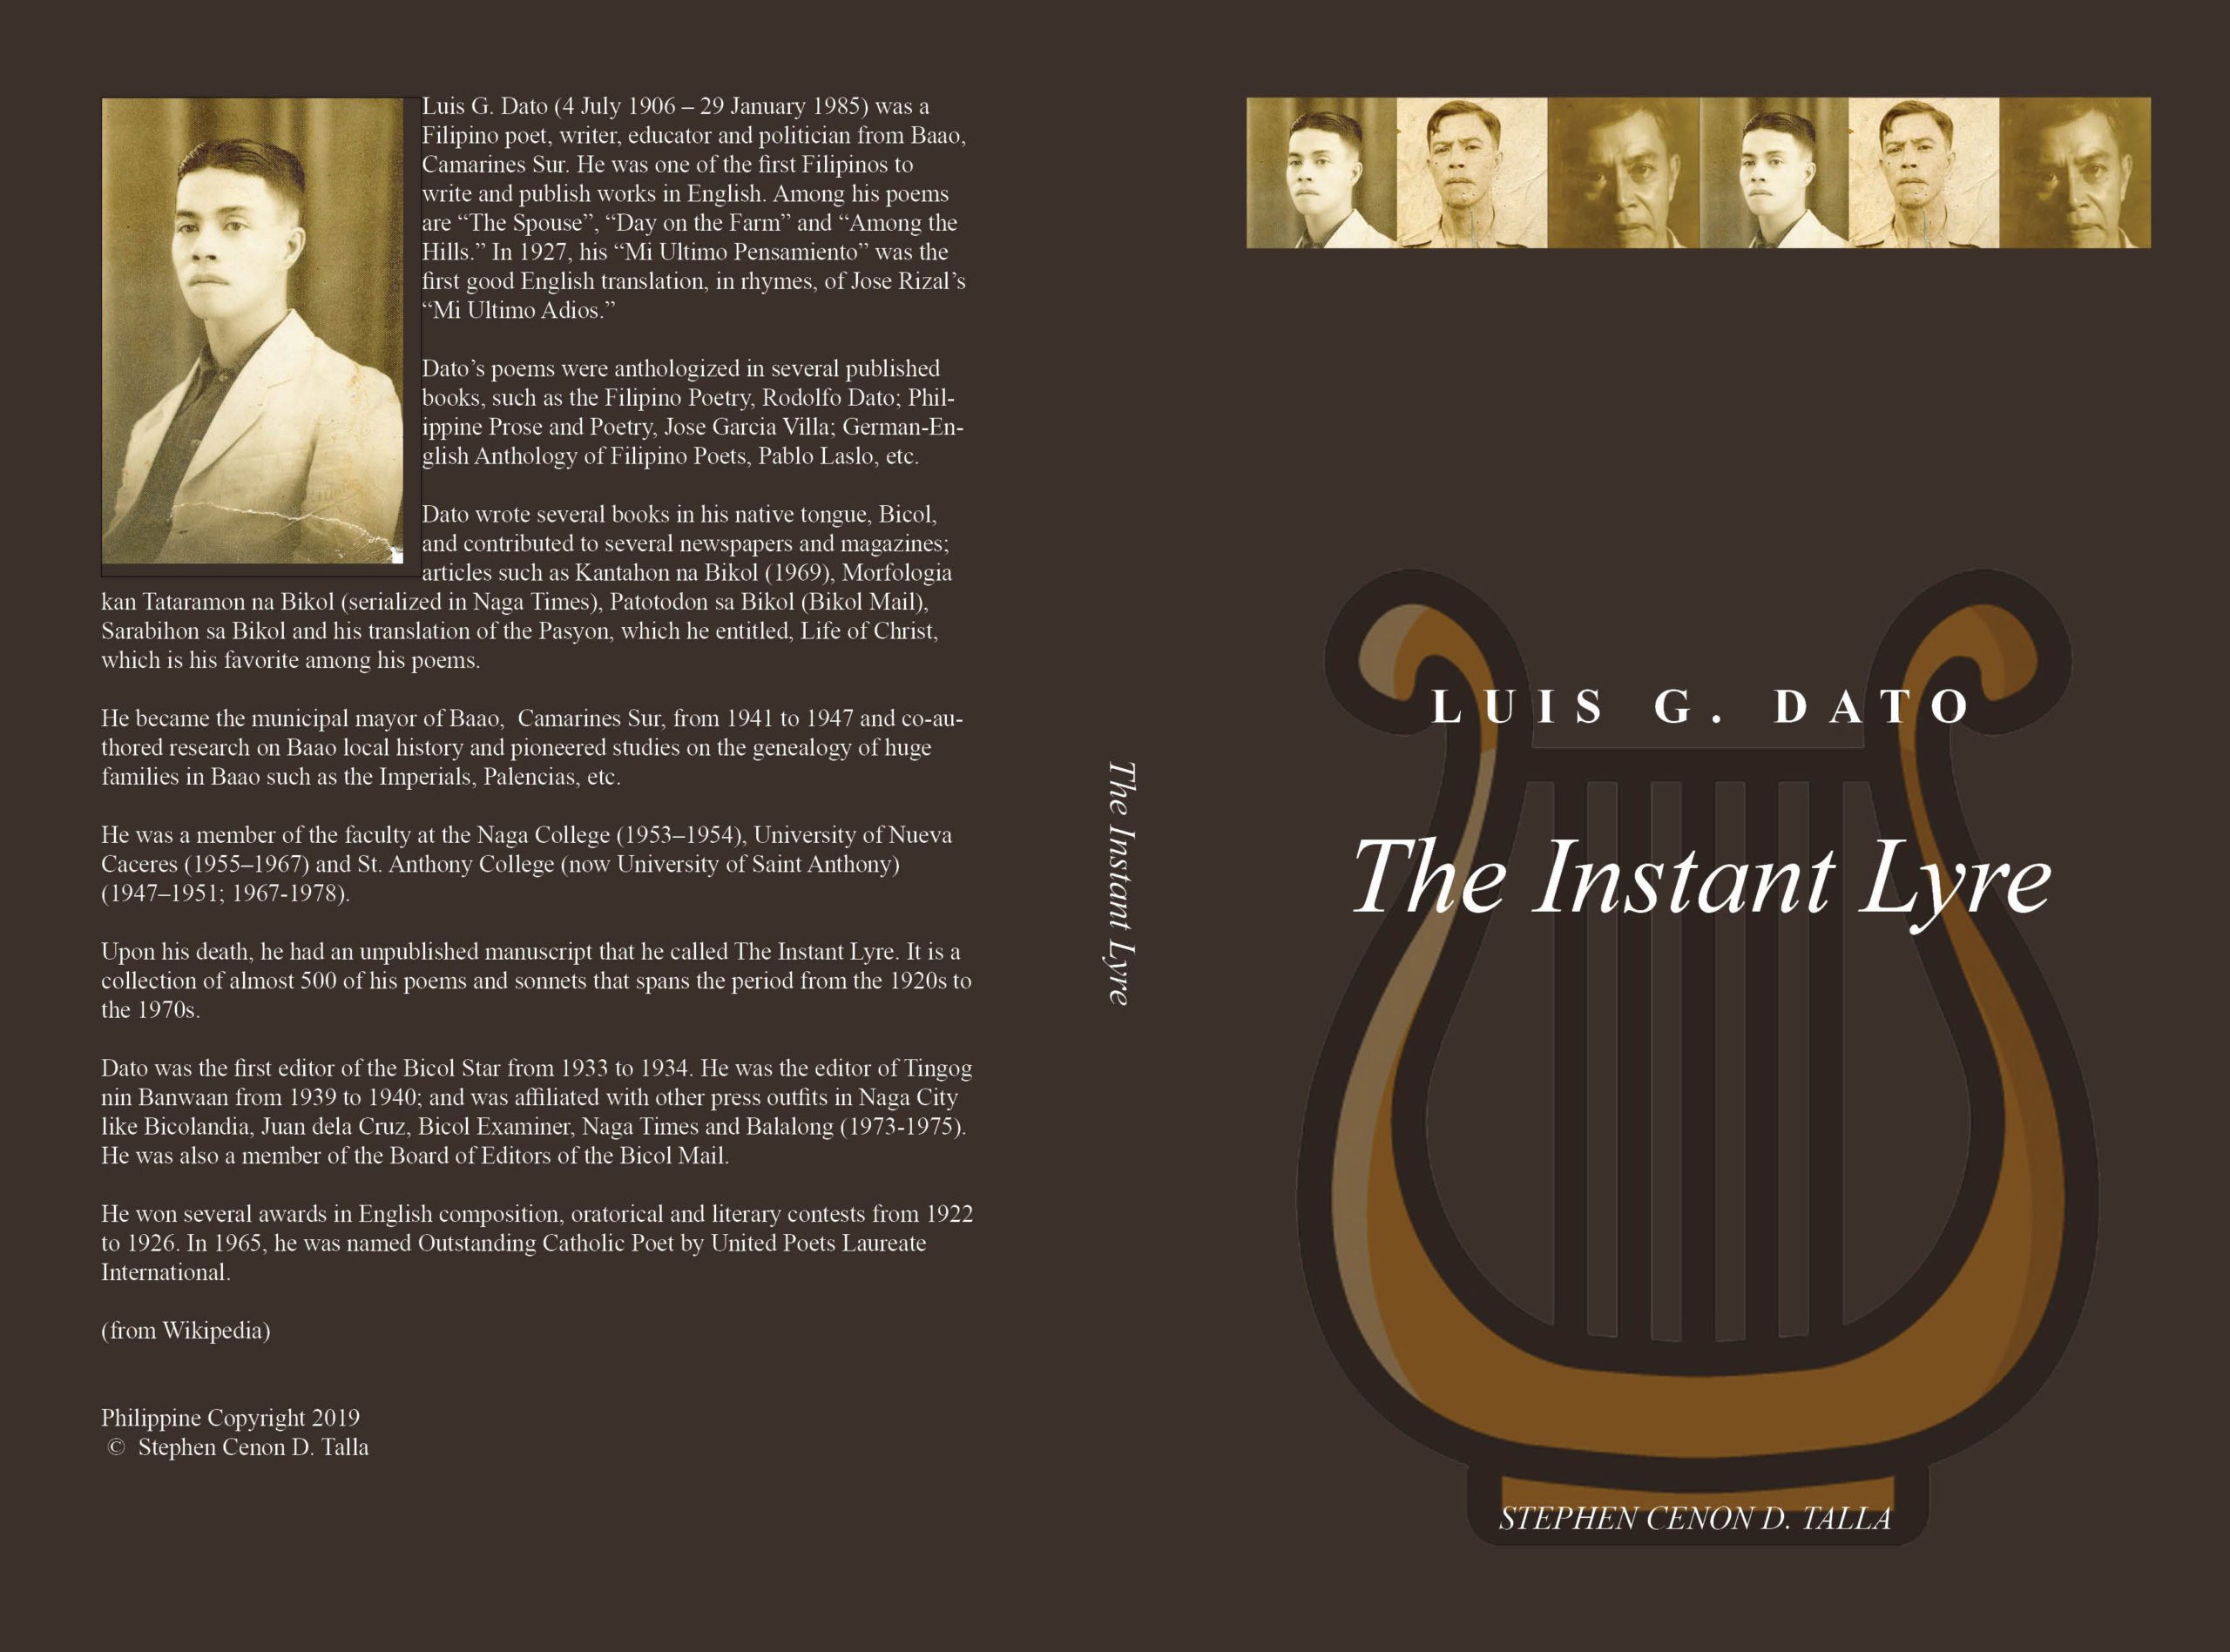 The Instant Lyre